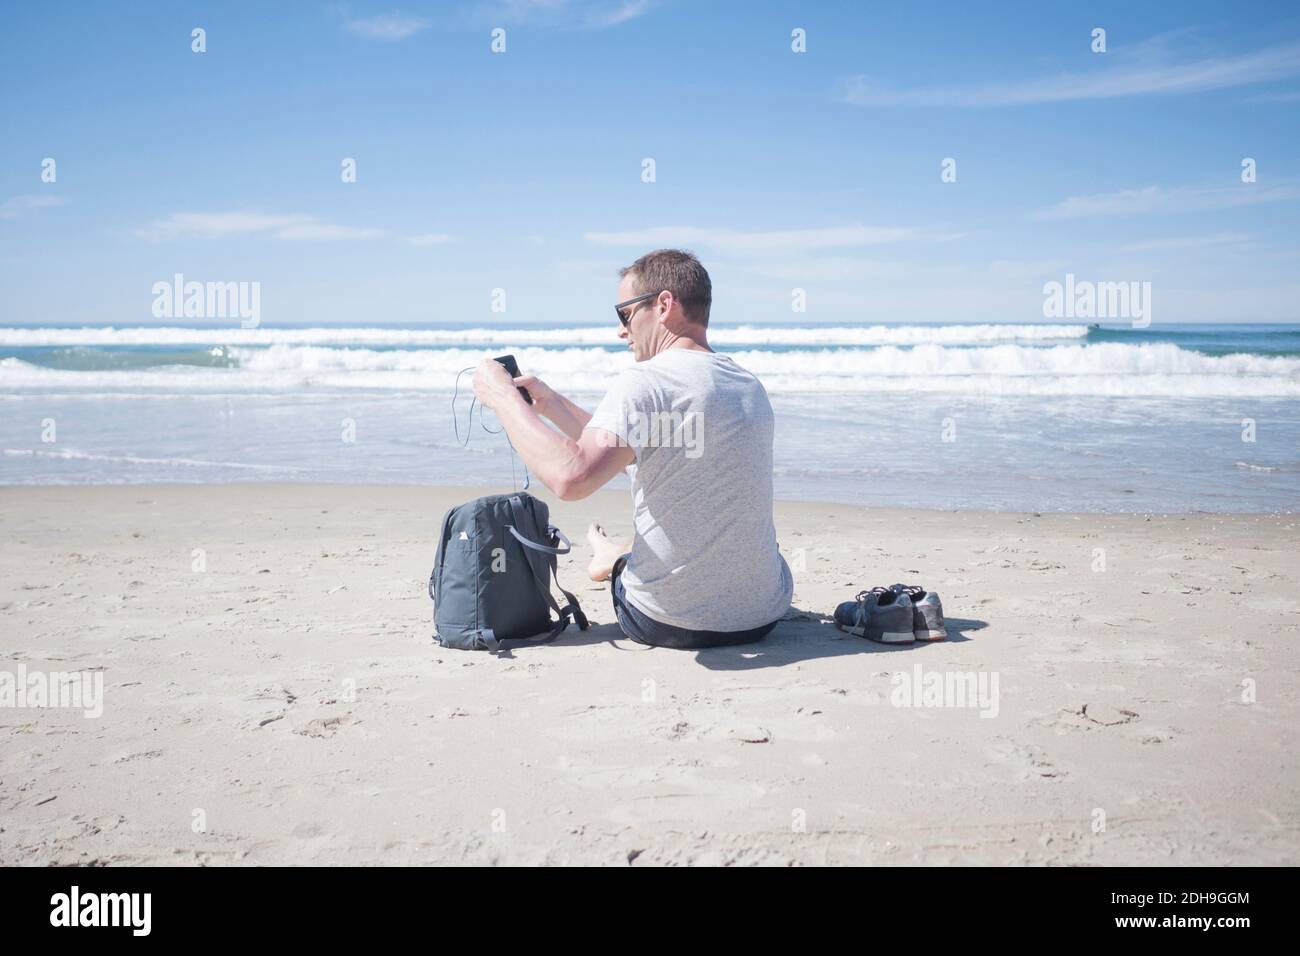 Rear view of man with mobile phone while taking earphones out of backpack at beach Stock Photo